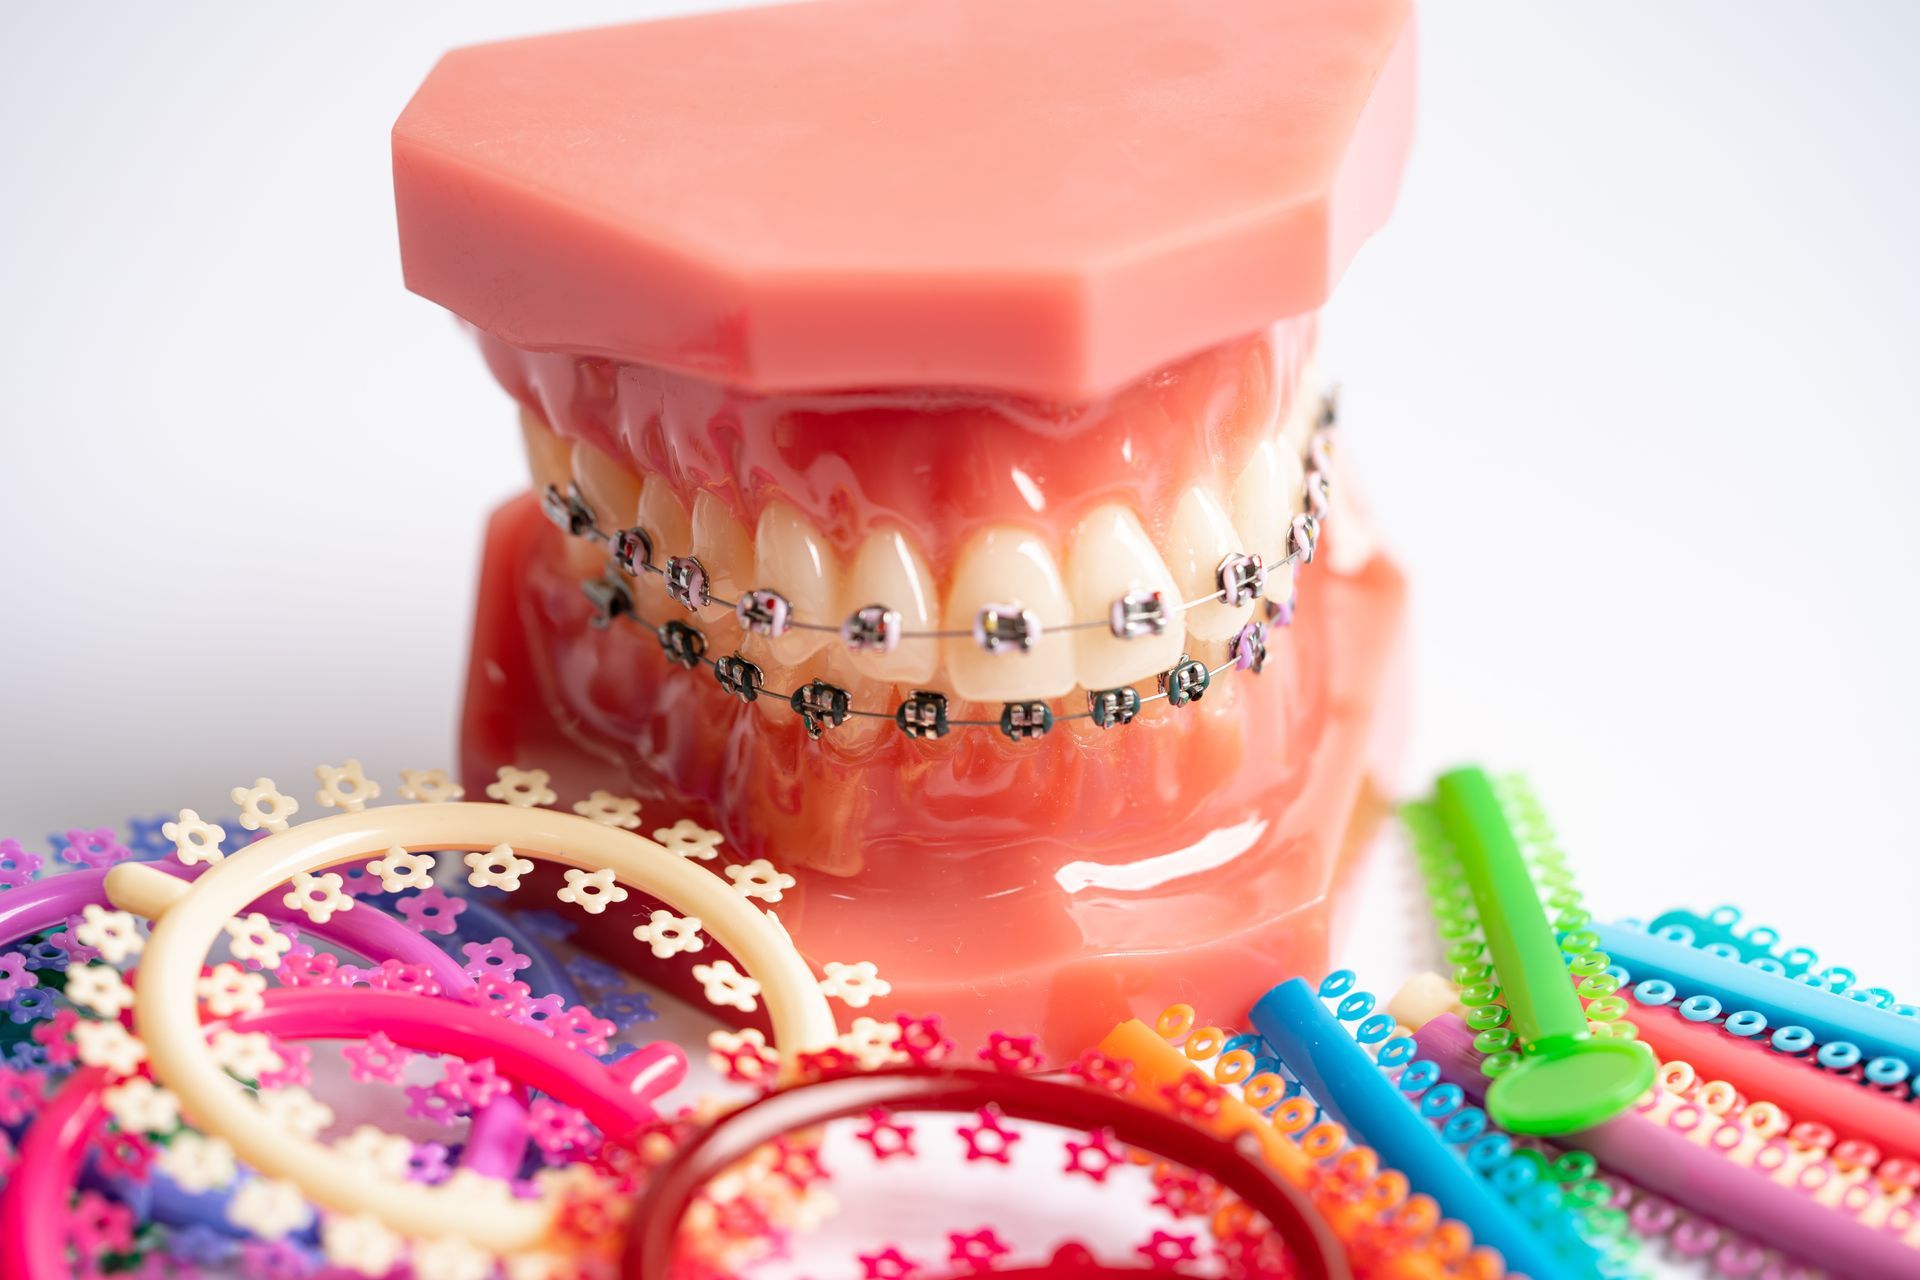 Transform Your Smile with Braces: Advanced Dental Center, Louisville, KY